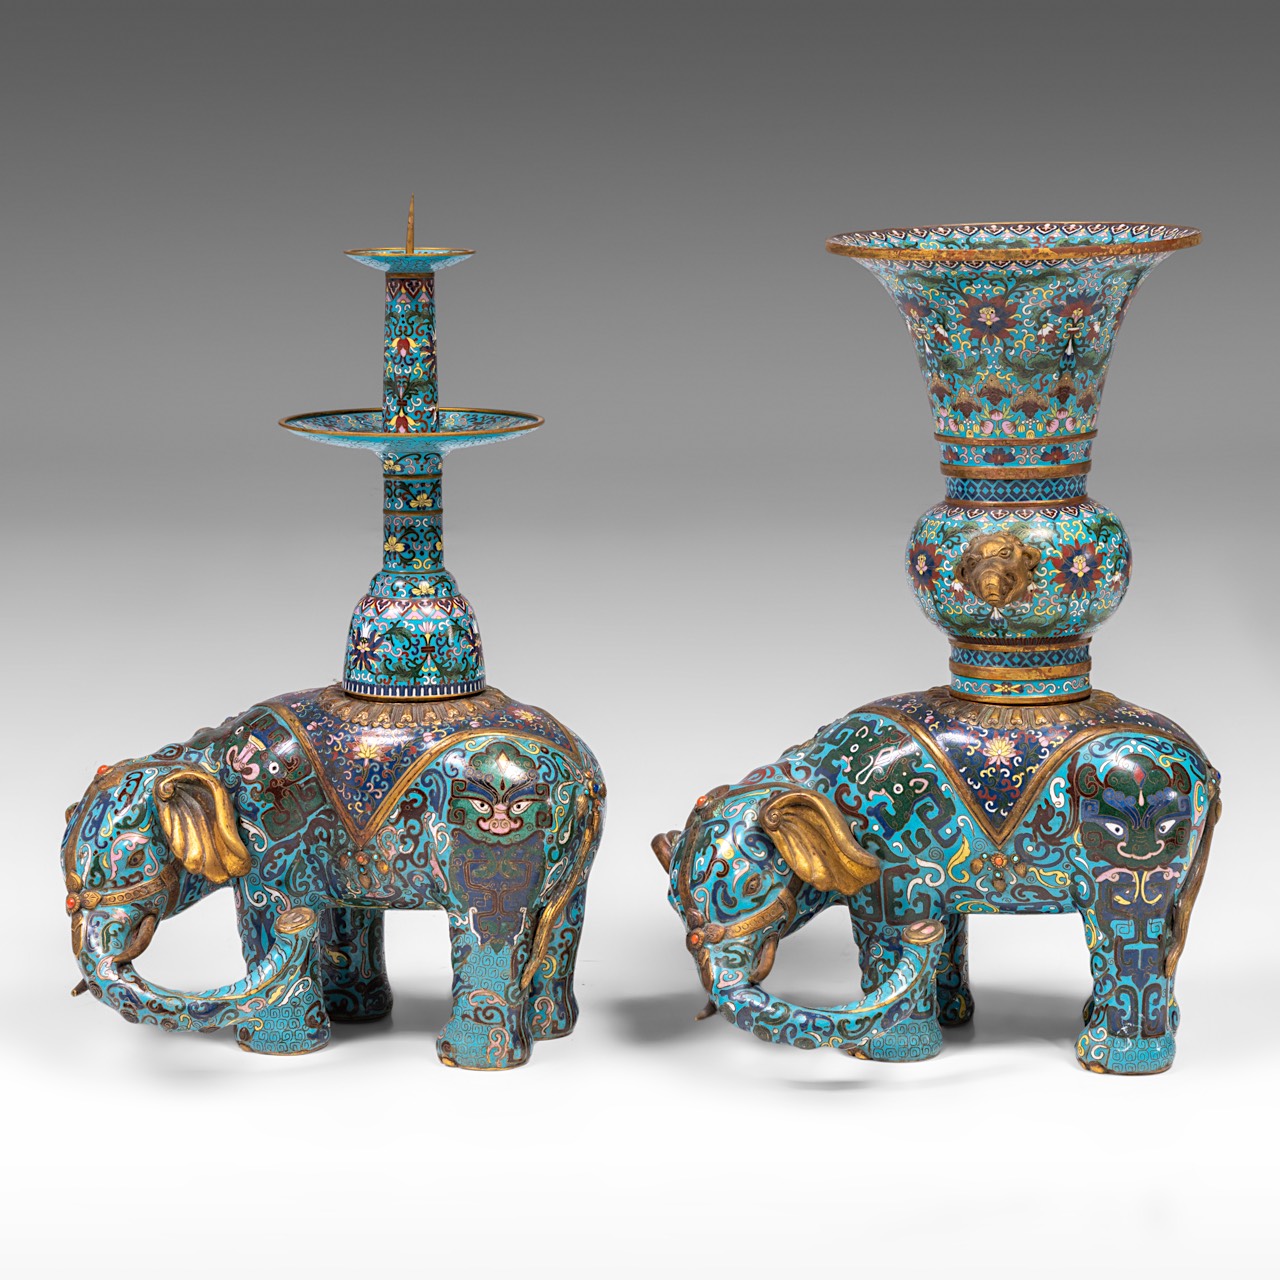 A Chinese five-piece semi-precious stone inlaid cloisonne garniture, late Qing/20thC, tallest H 58 - - Image 18 of 24